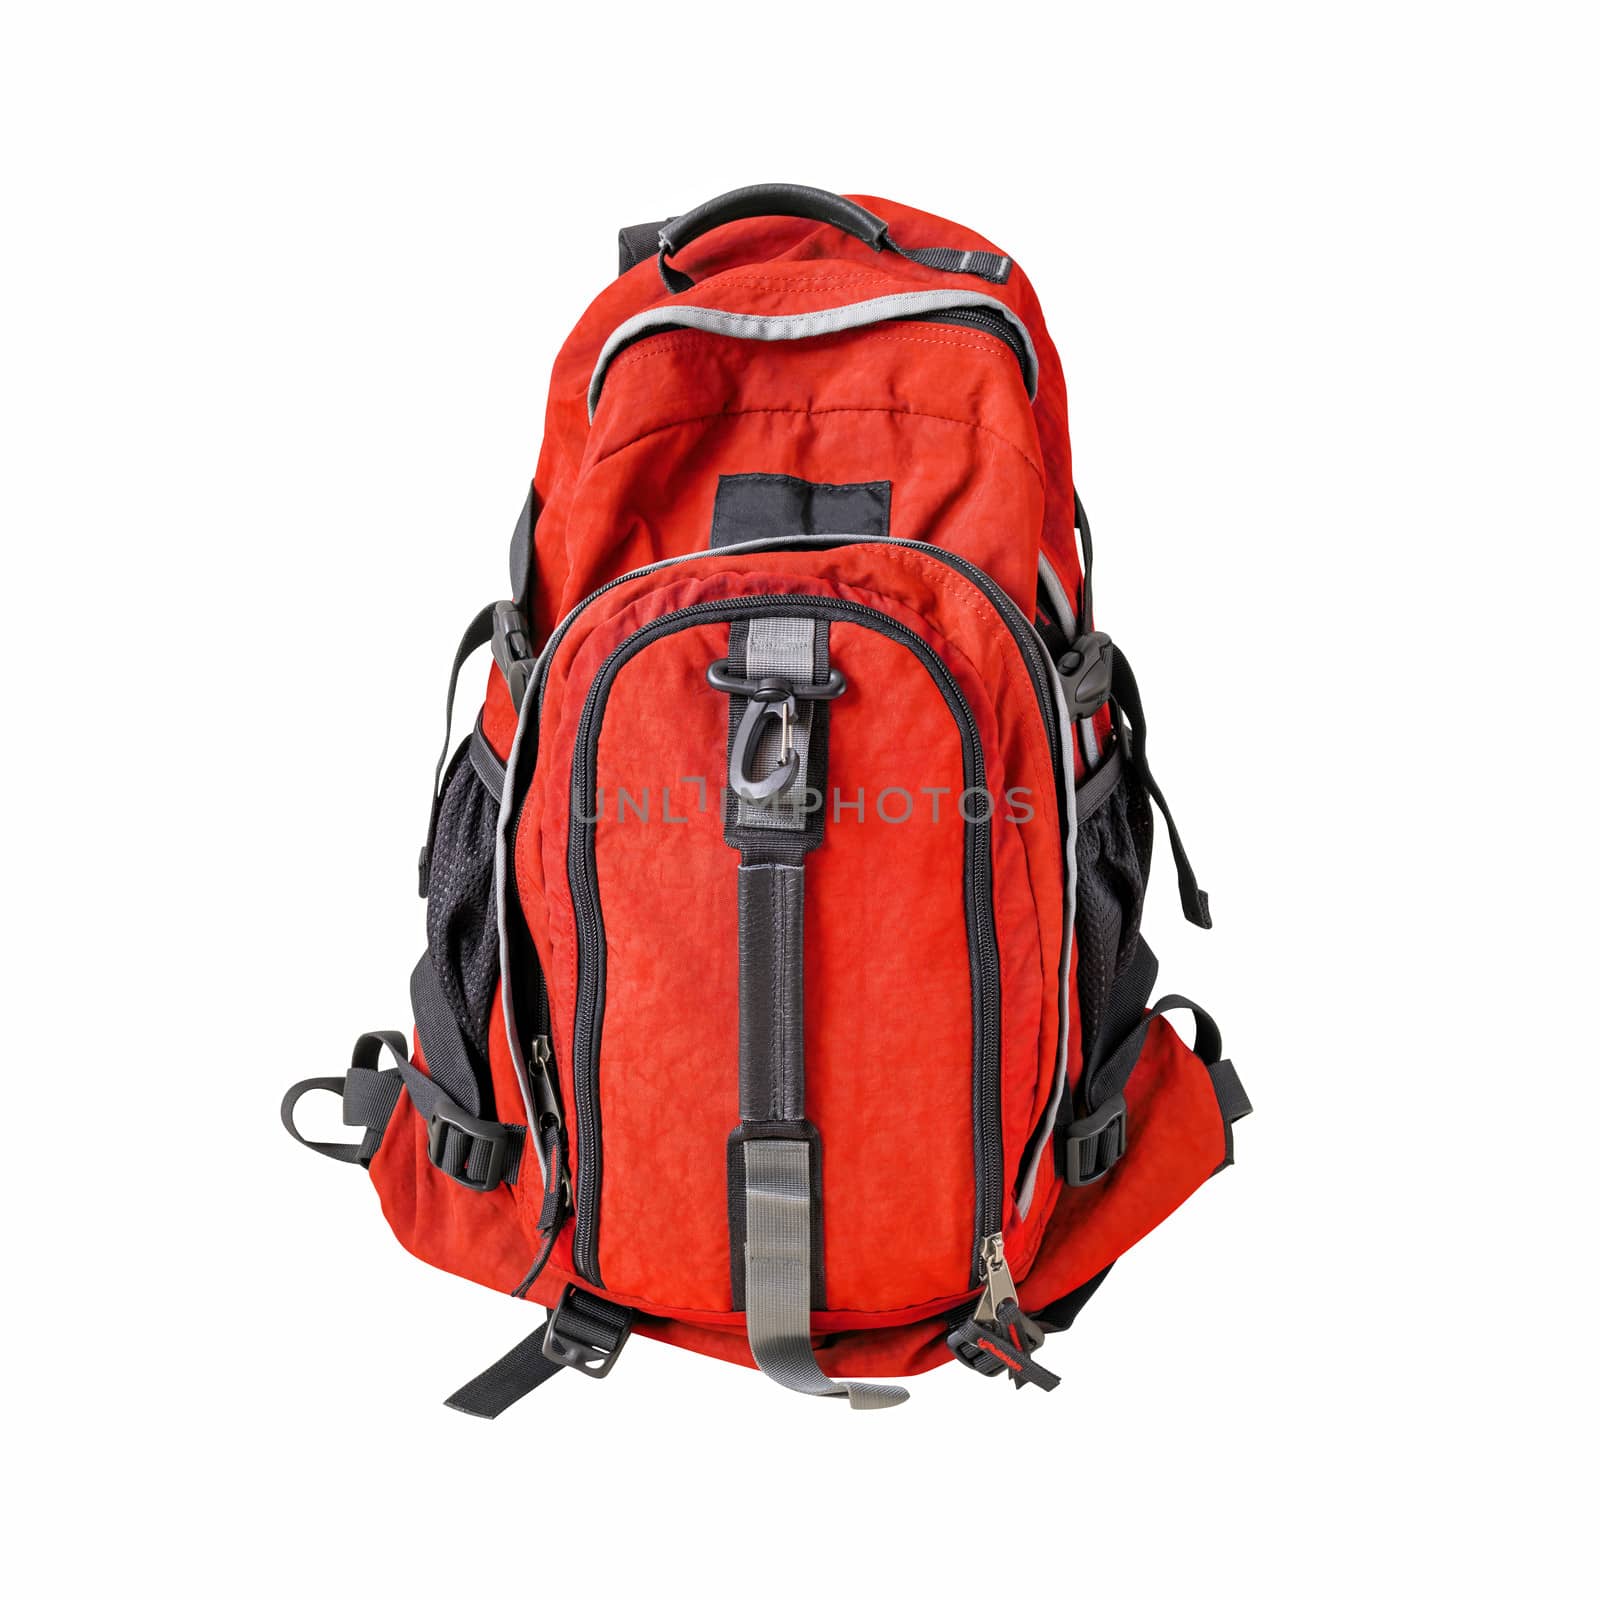 A high-resolution image of an isolated red-colored rucksack on white background. High-quality clipping path included.